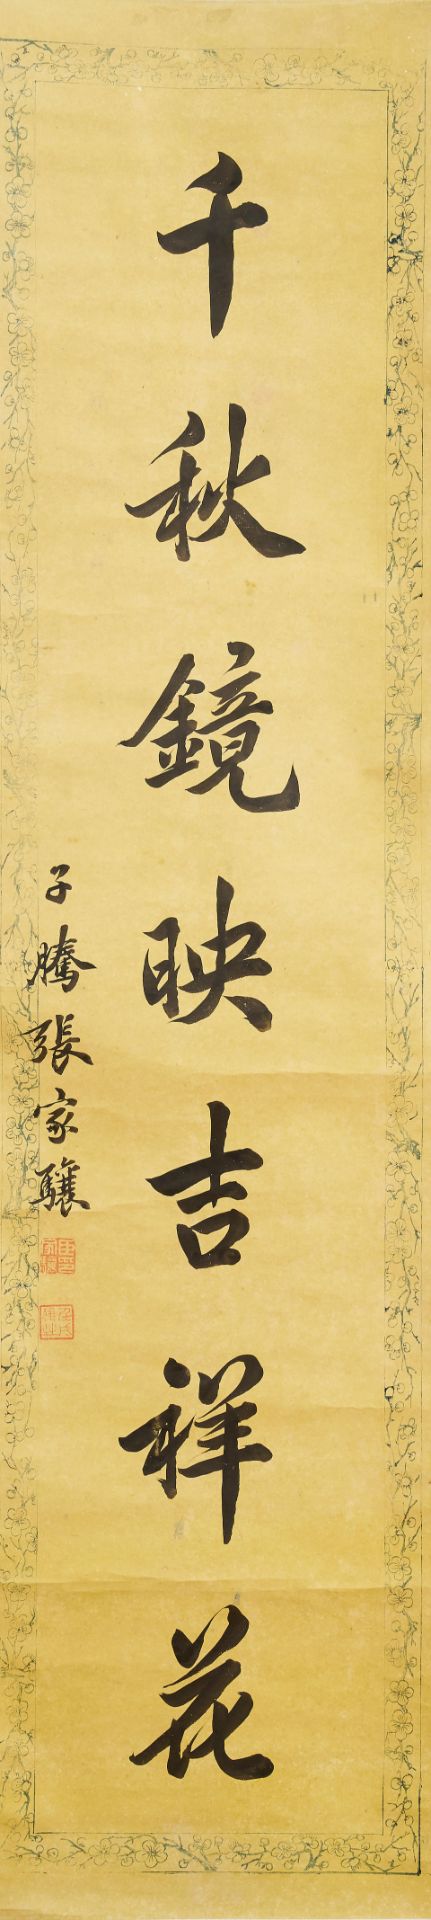 Zhang Jiaxiang (1827-1885) Calligraphy Couplet in Running Style (2) - Image 3 of 3